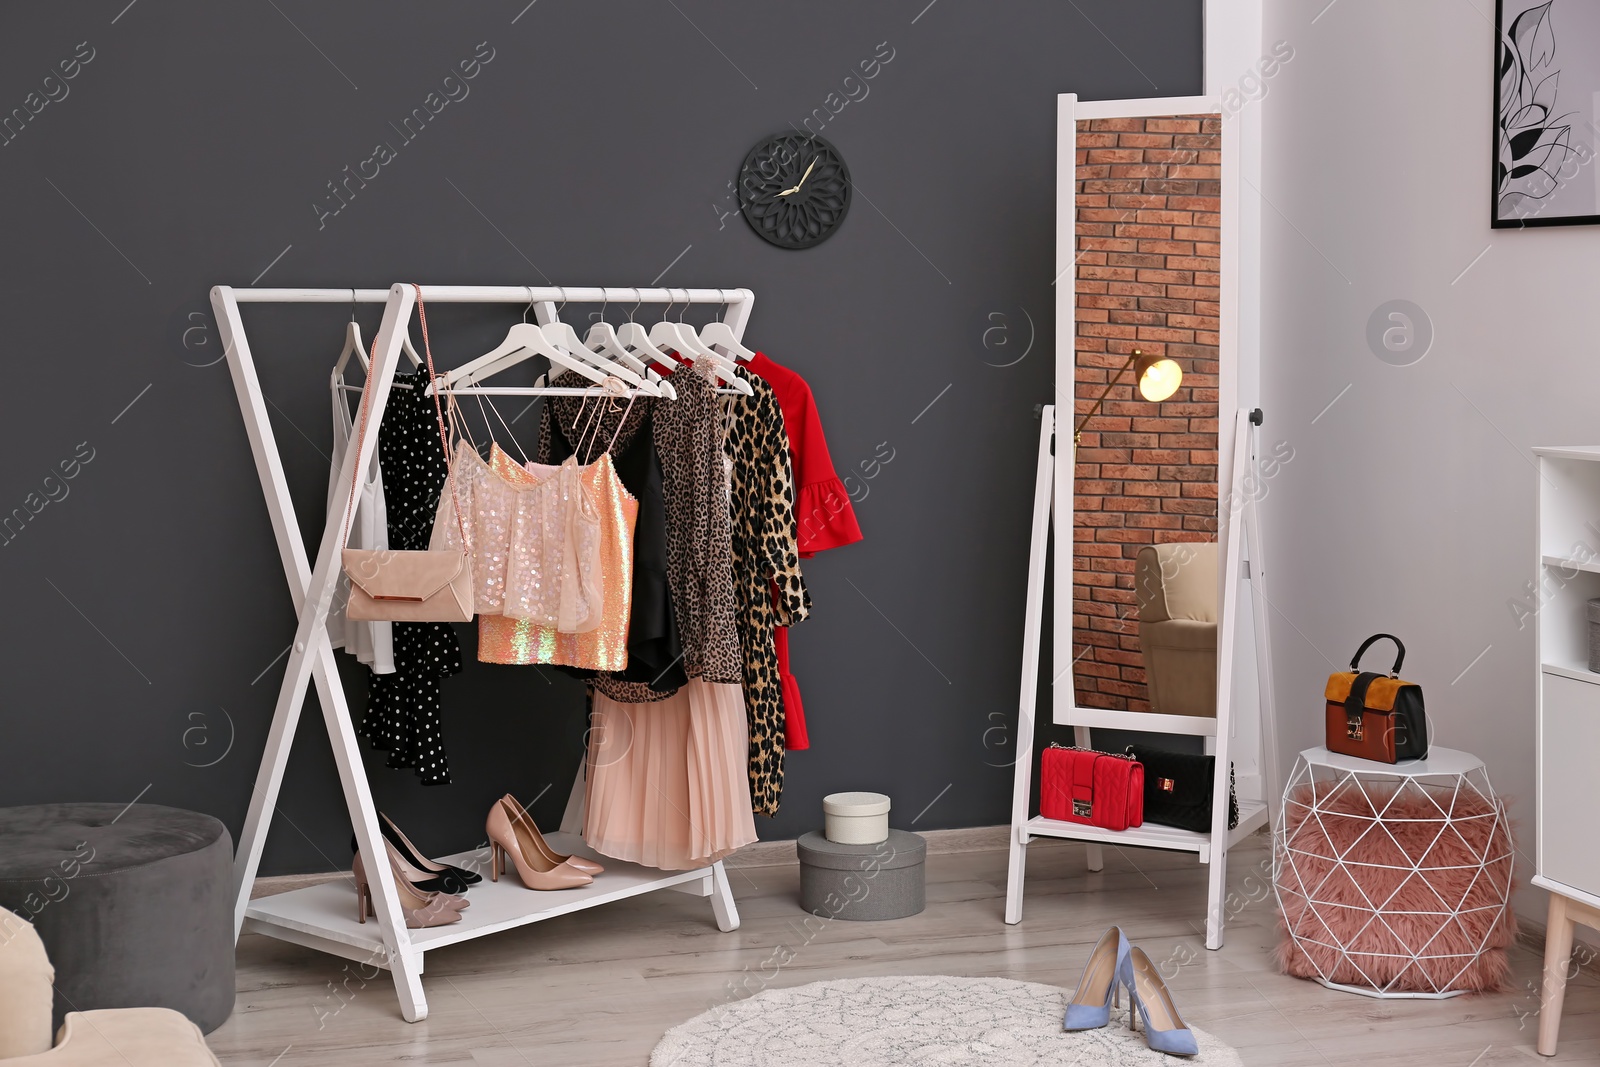 Photo of Wardrobe rack with women's clothes and shoes in dressing room